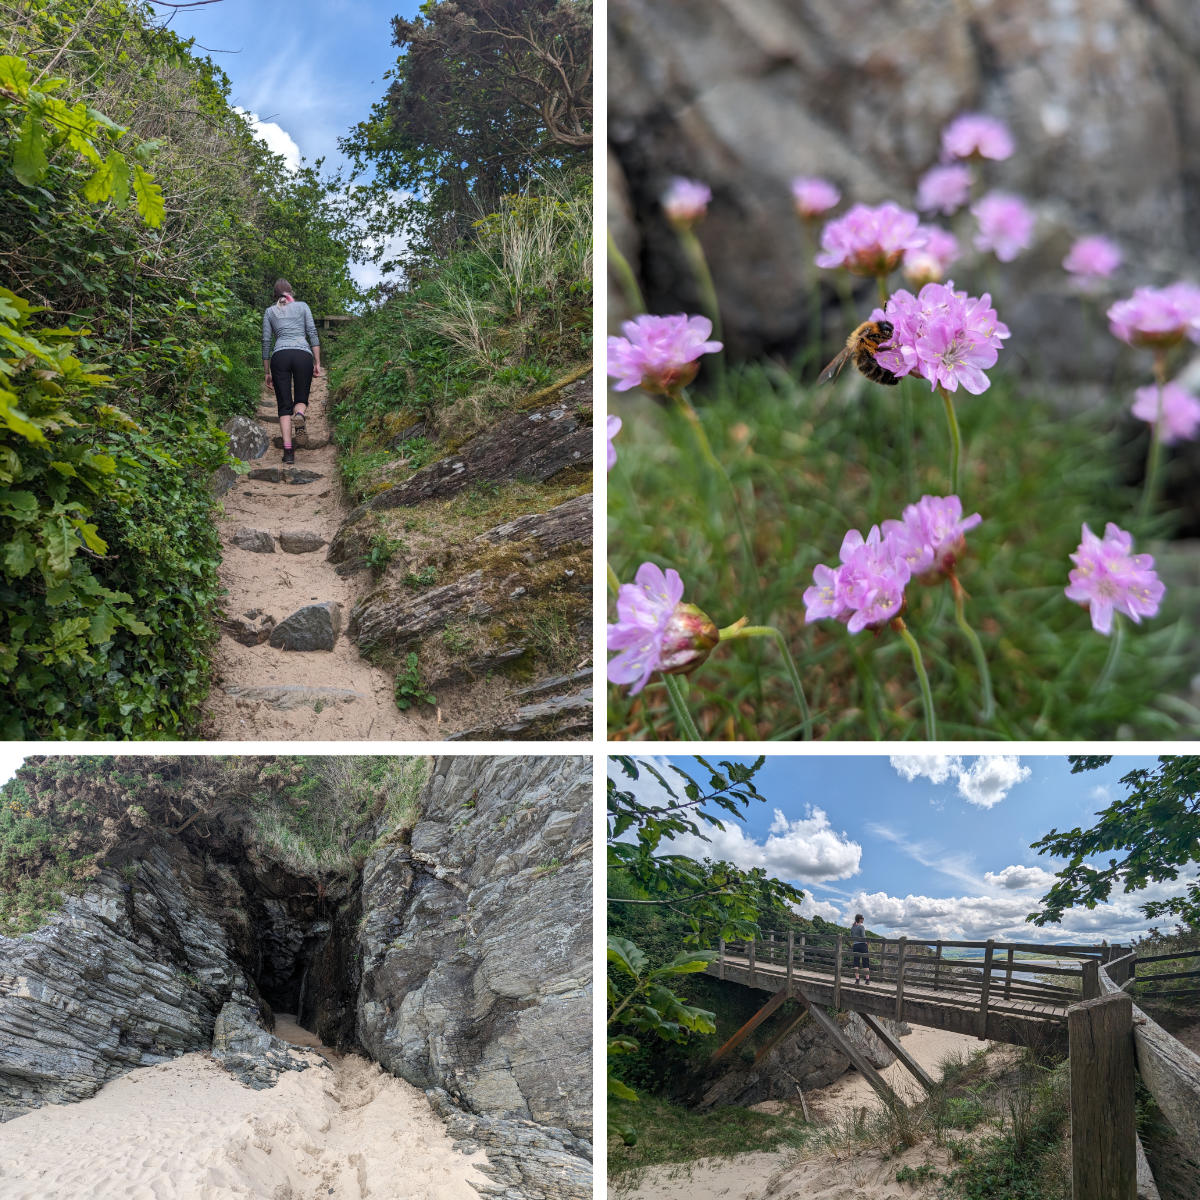 More exploring around the beaches and pathways